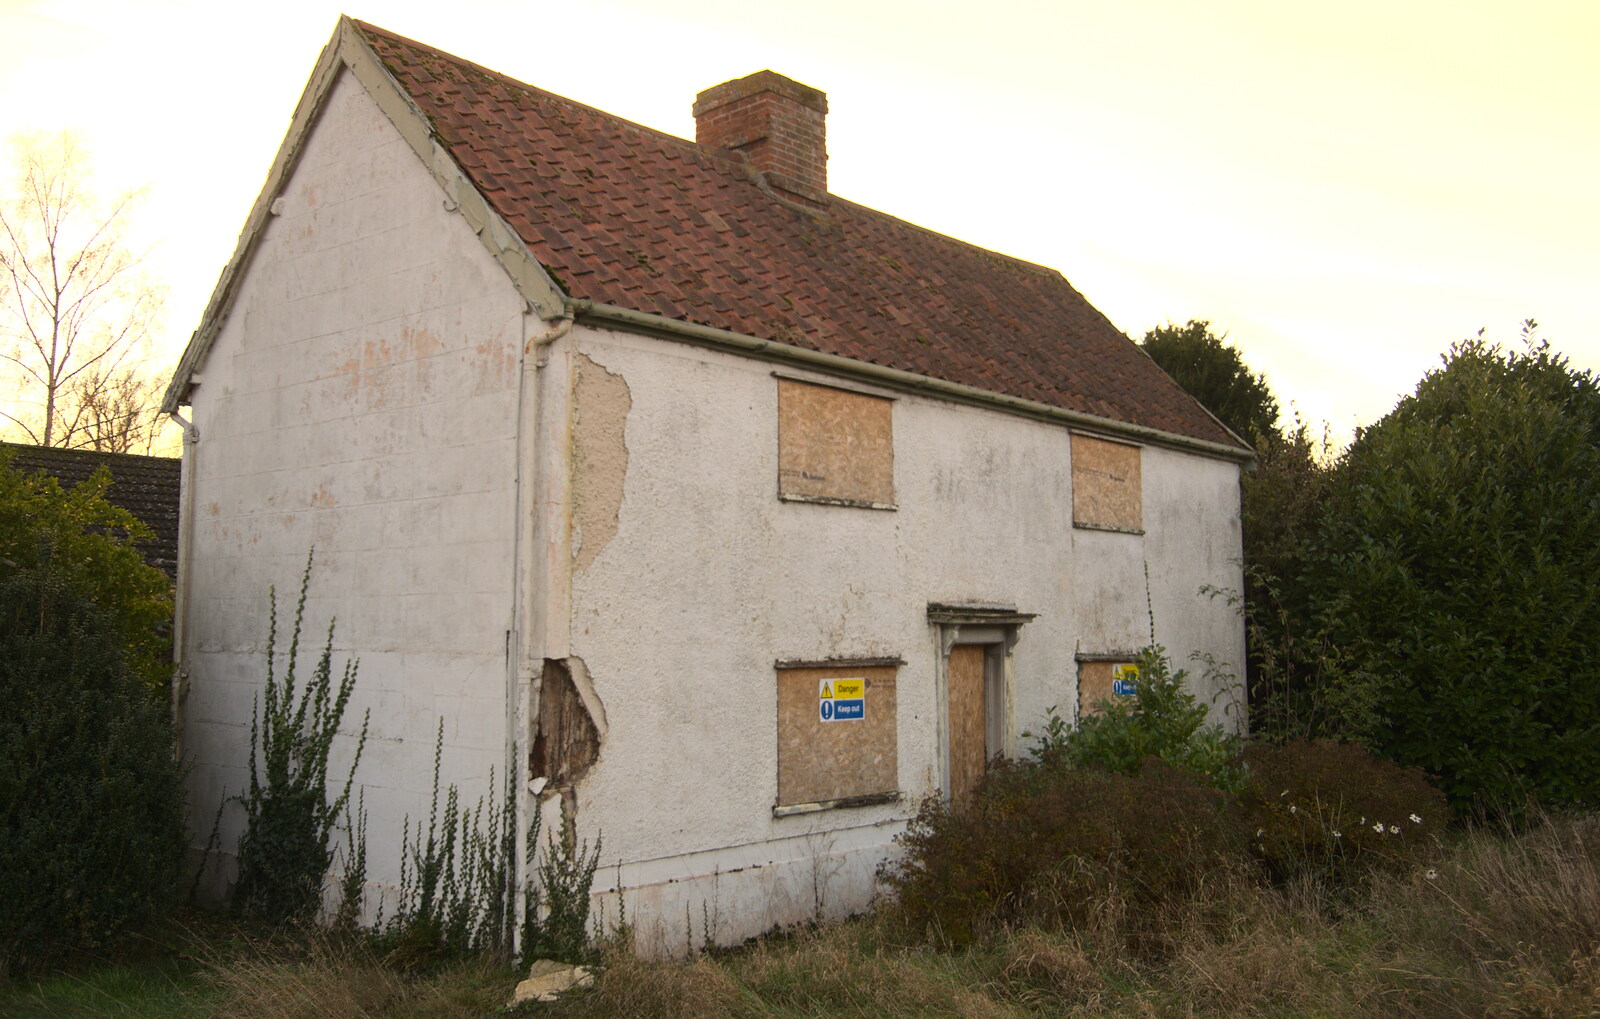 A derelict house on Lowgate Street in Eye from A Walk Around Eye, Suffolk - 19th November 2017